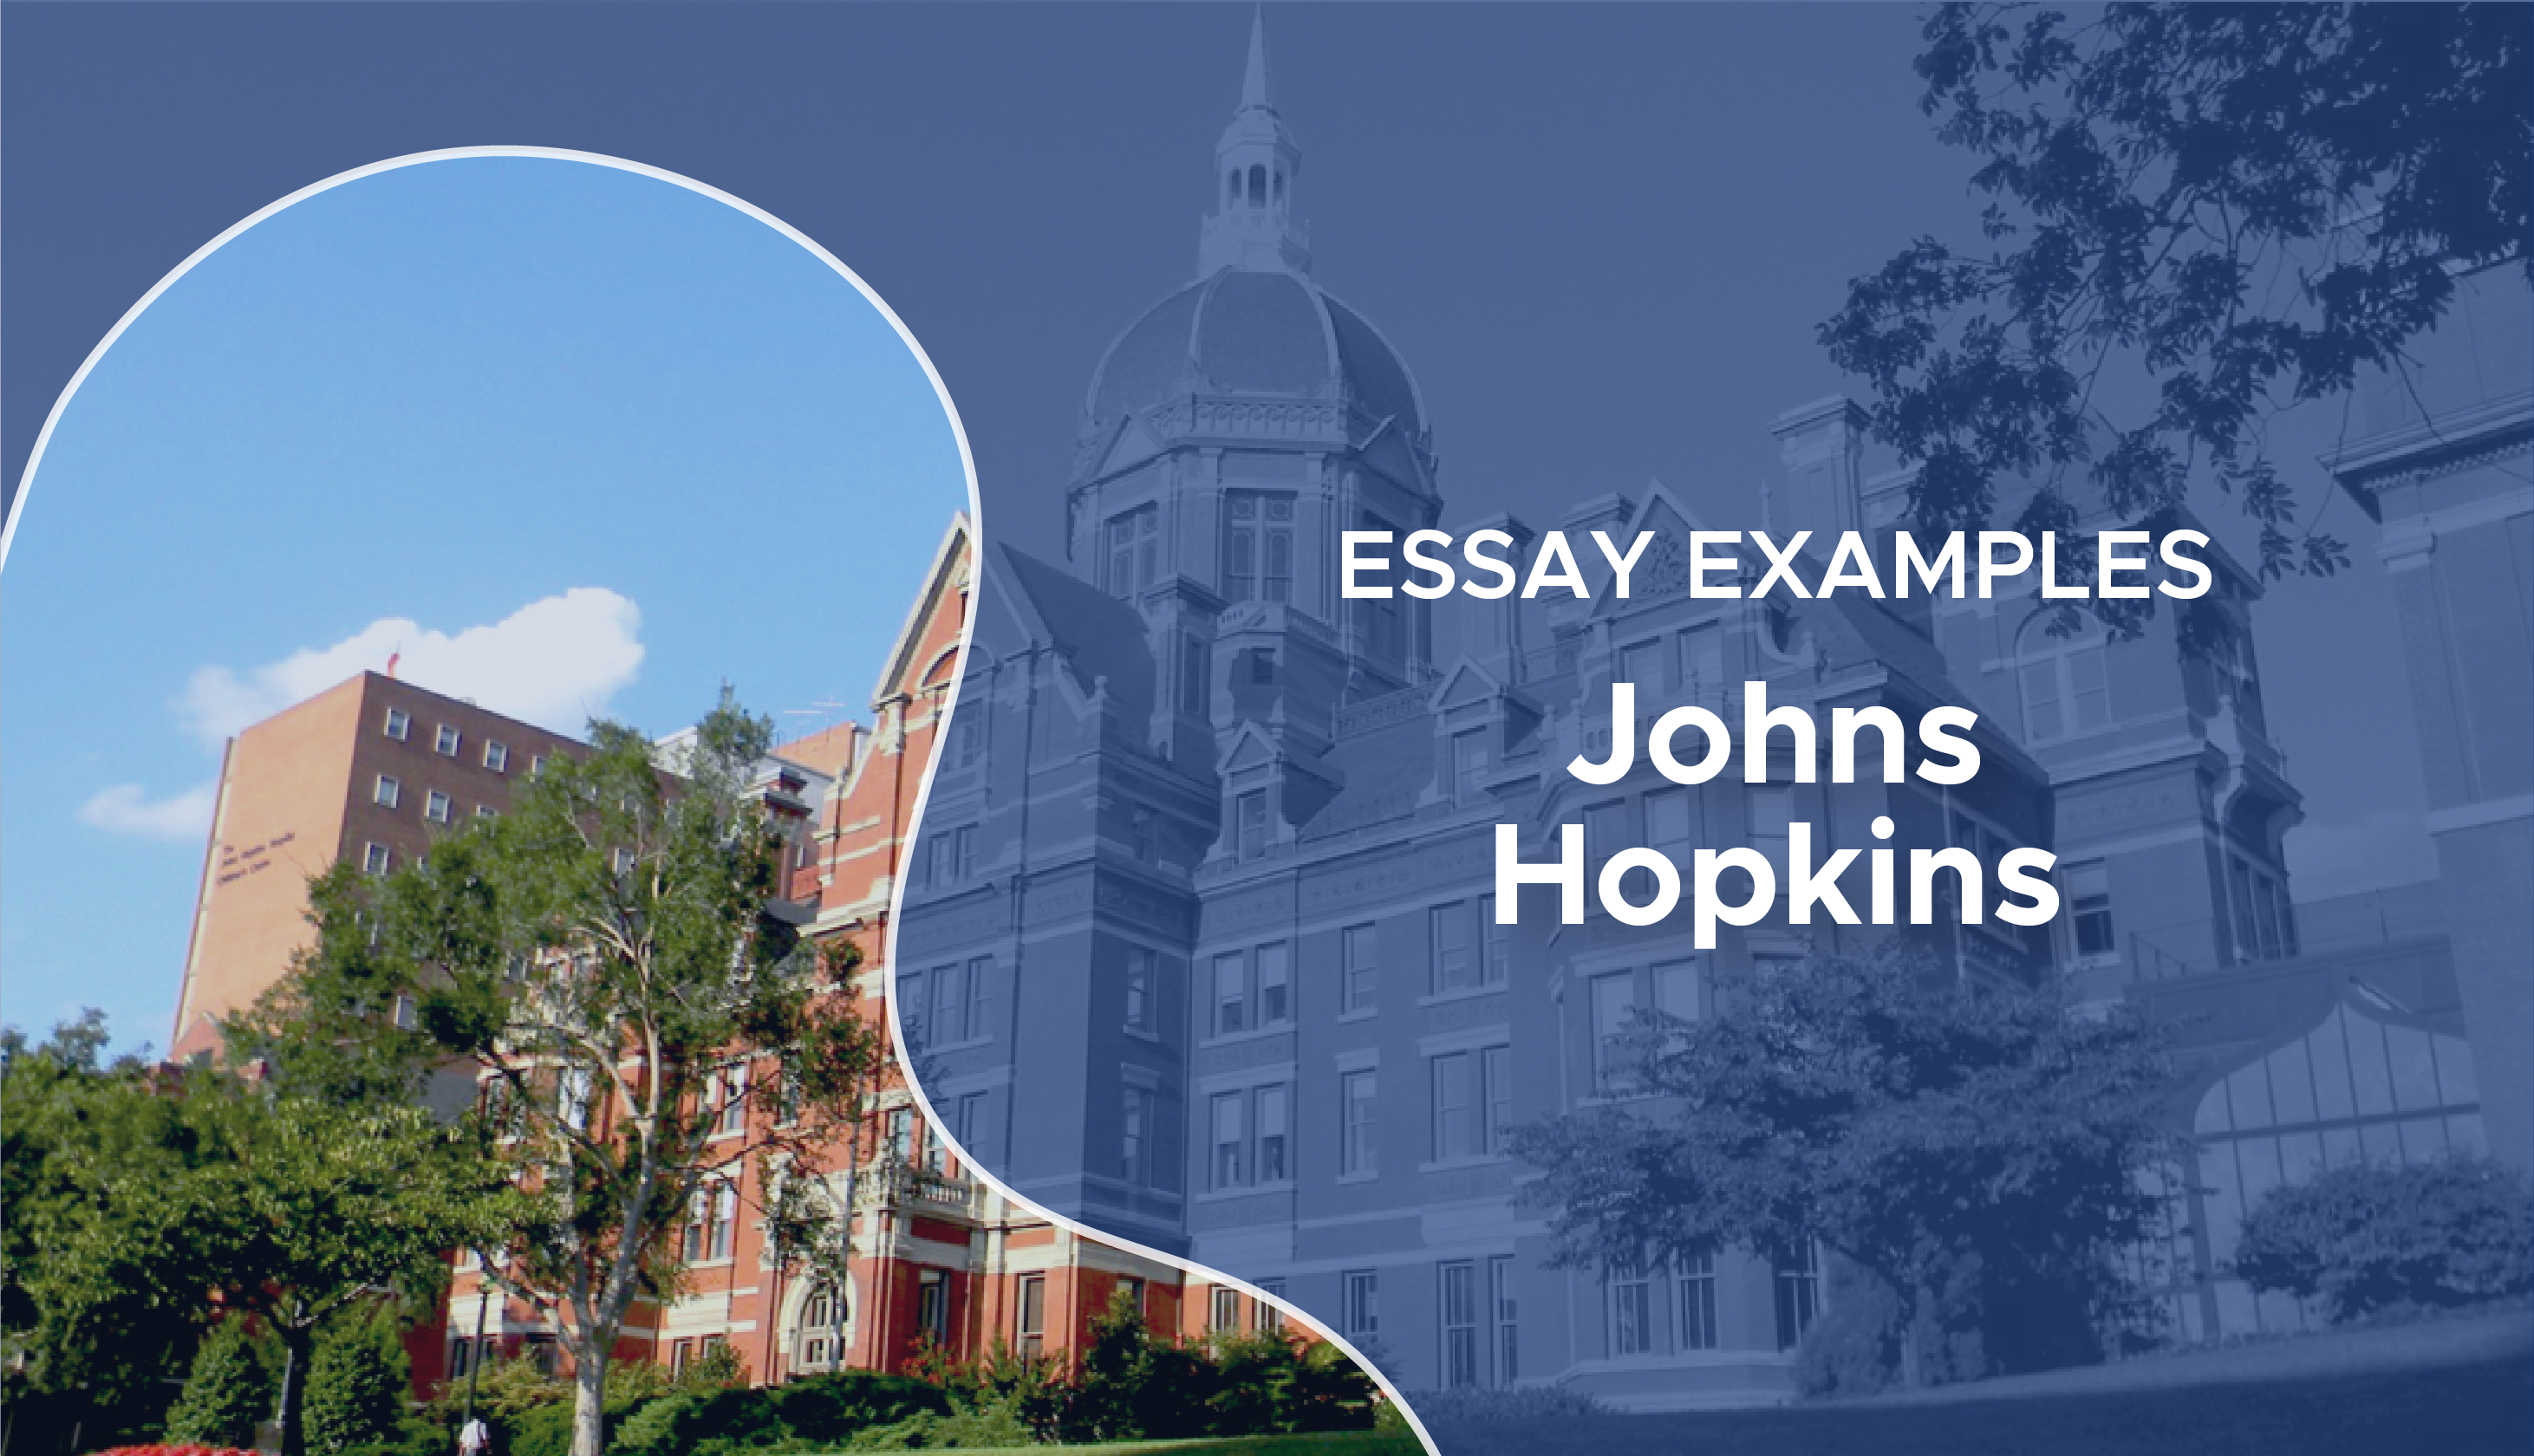 essays that worked for johns hopkins